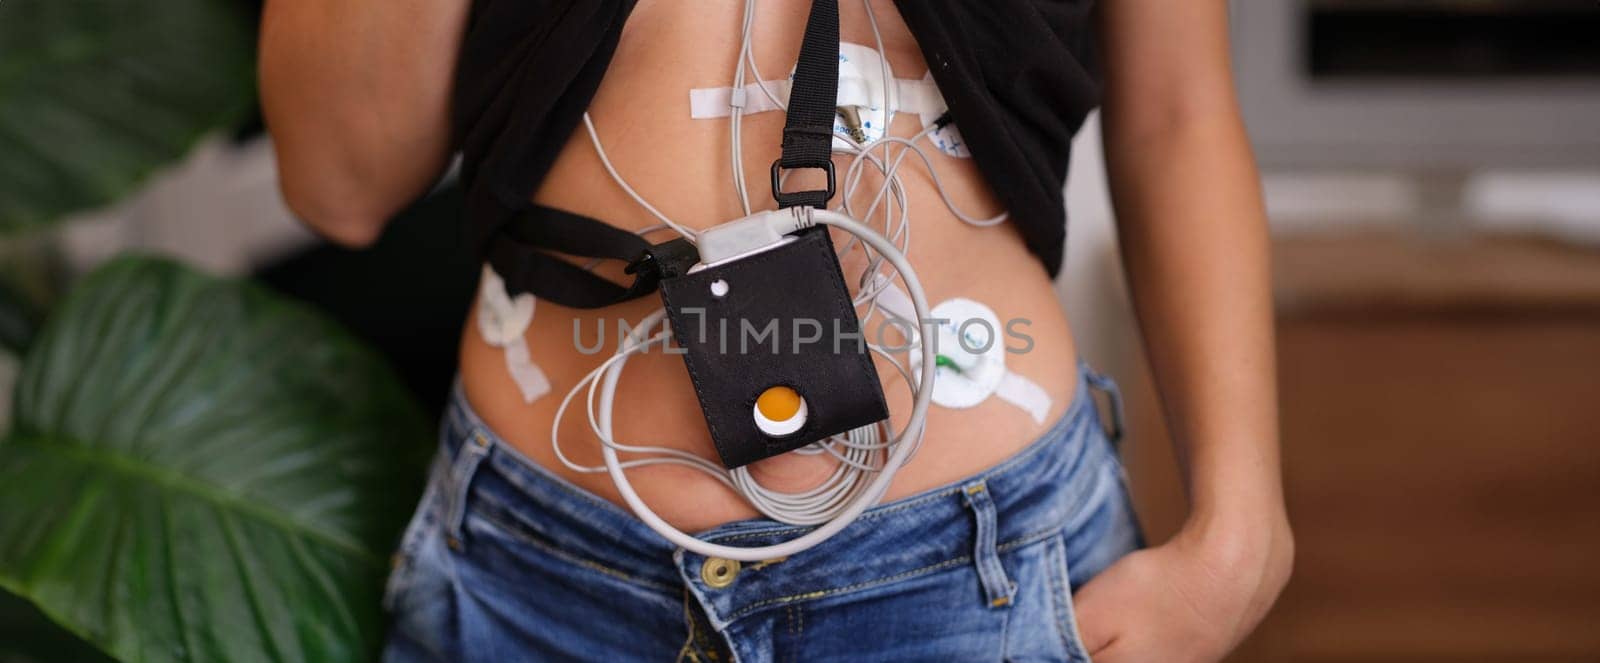 24-hour ECG monitoring and Holter monitoring on a woman body. Cardiac examination and heart health